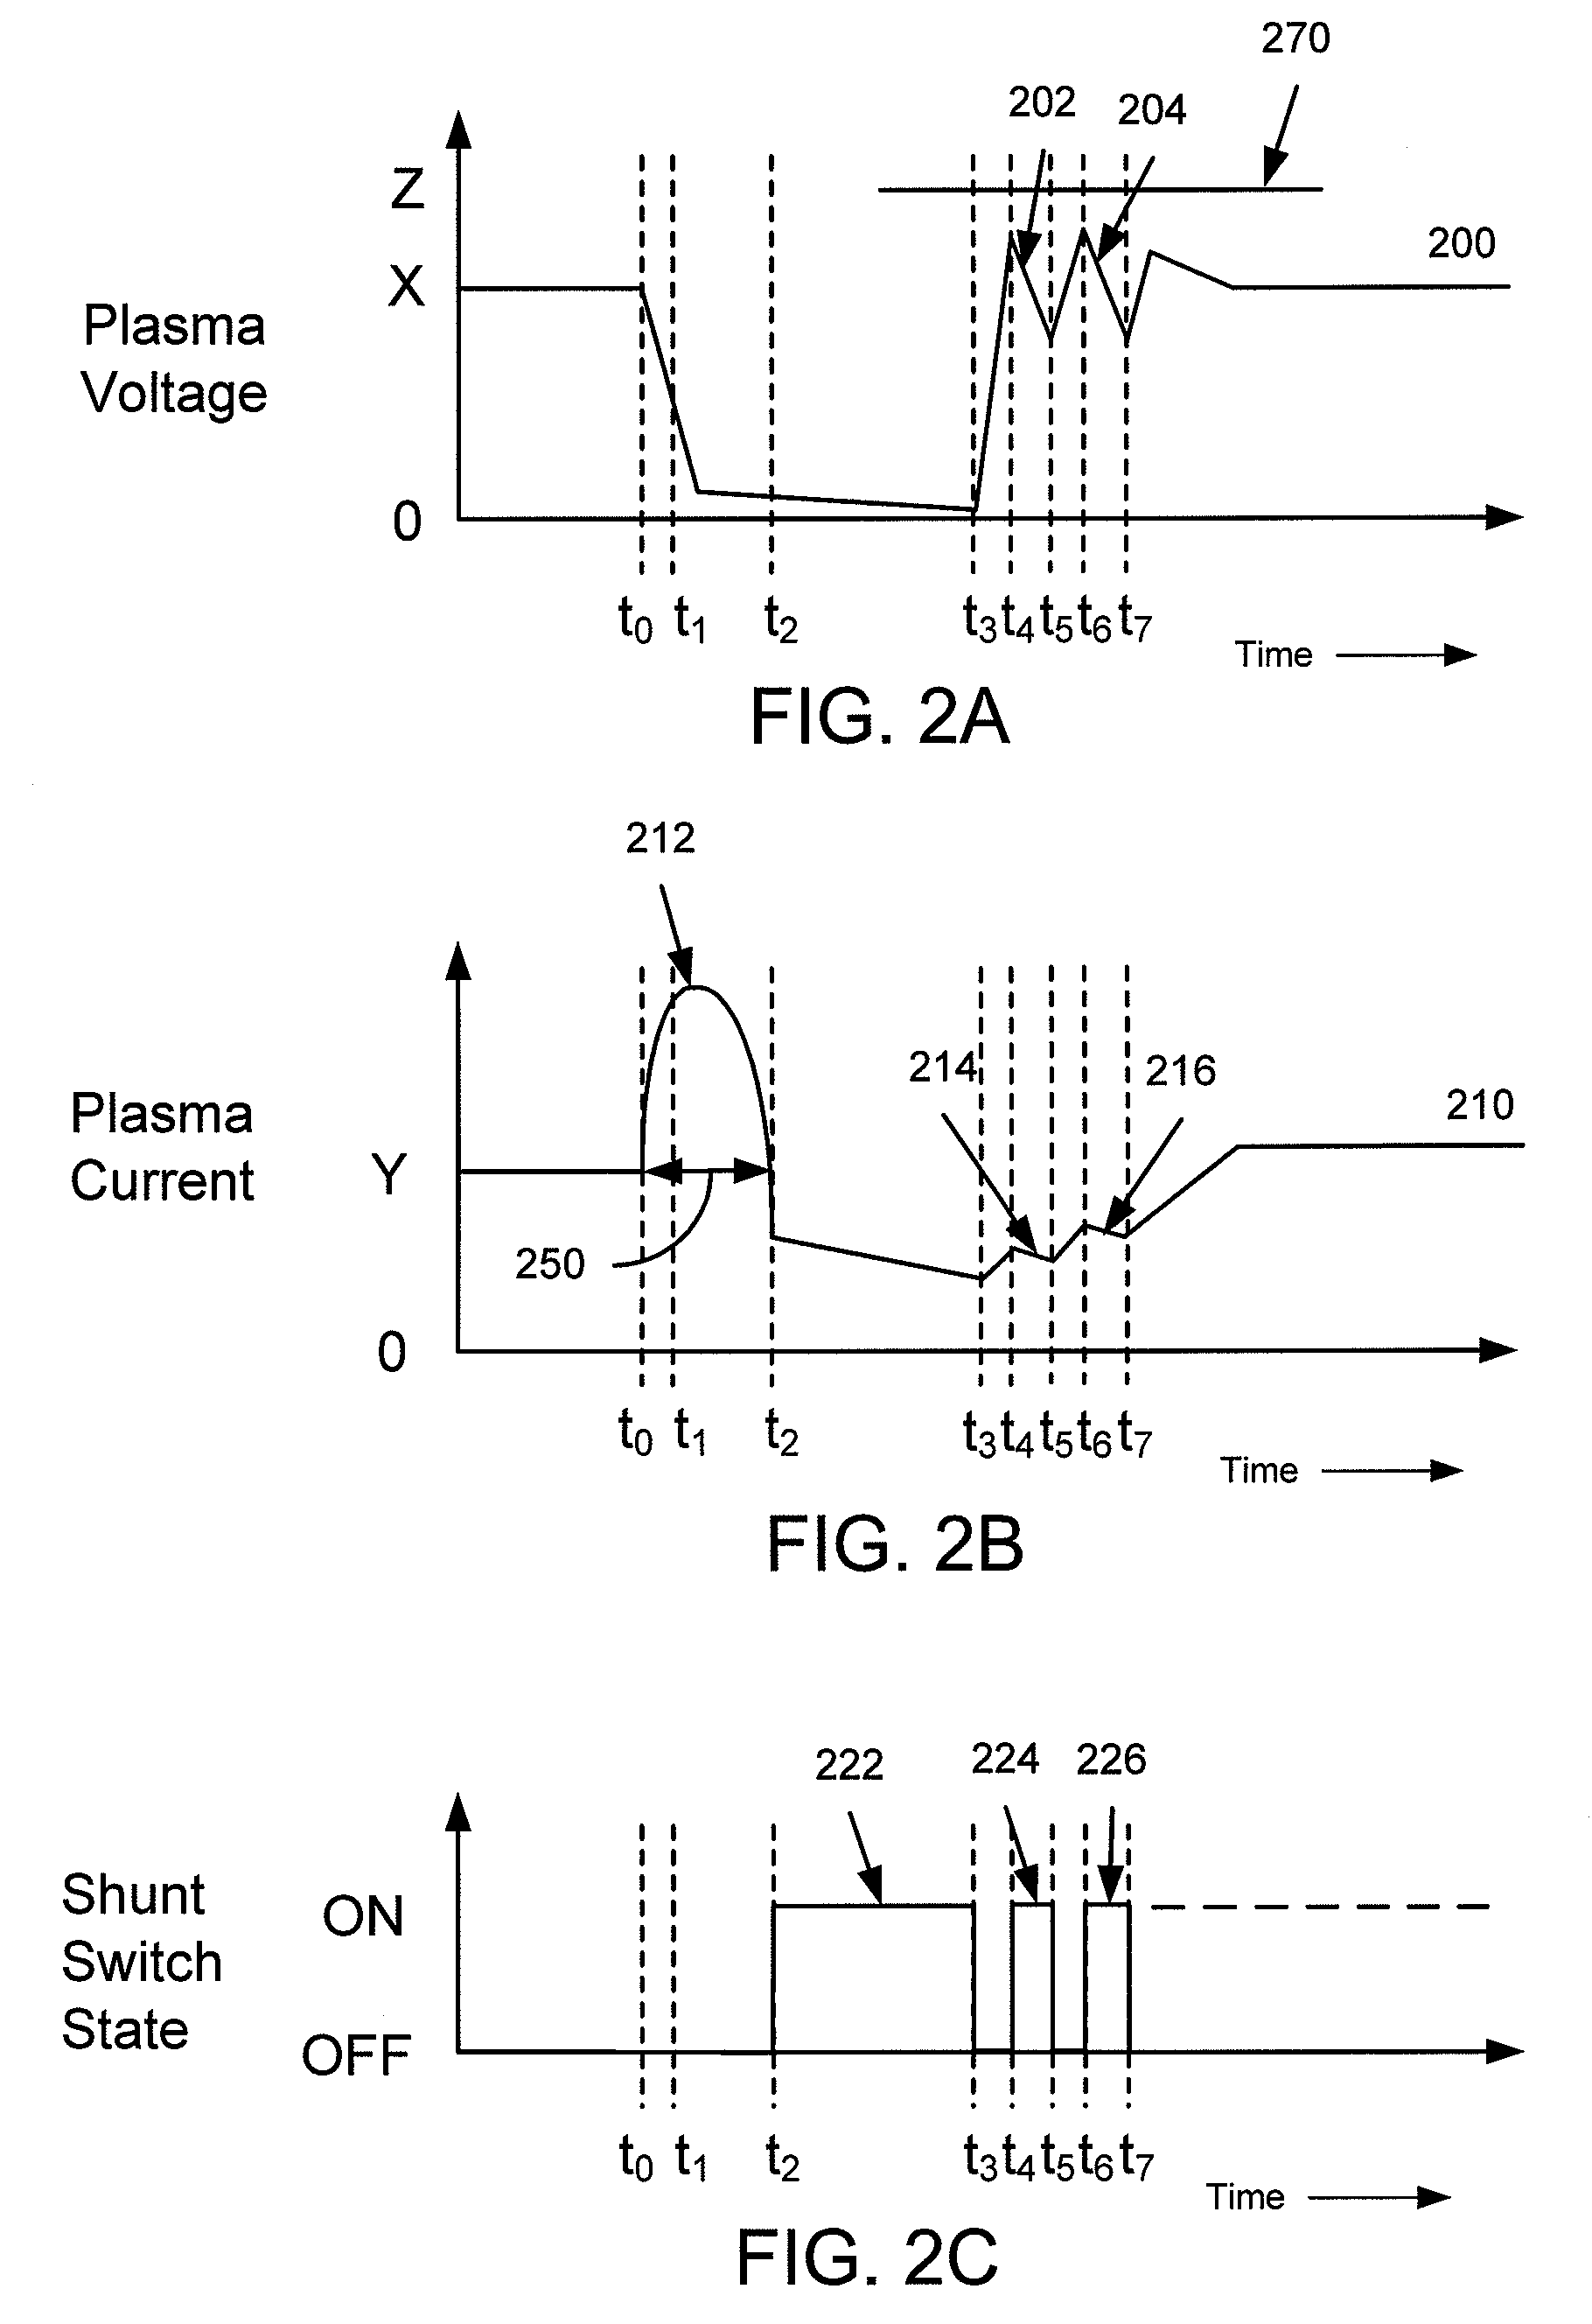 Arc recovery without over-voltage for plasma chamber power supplies using a shunt switch